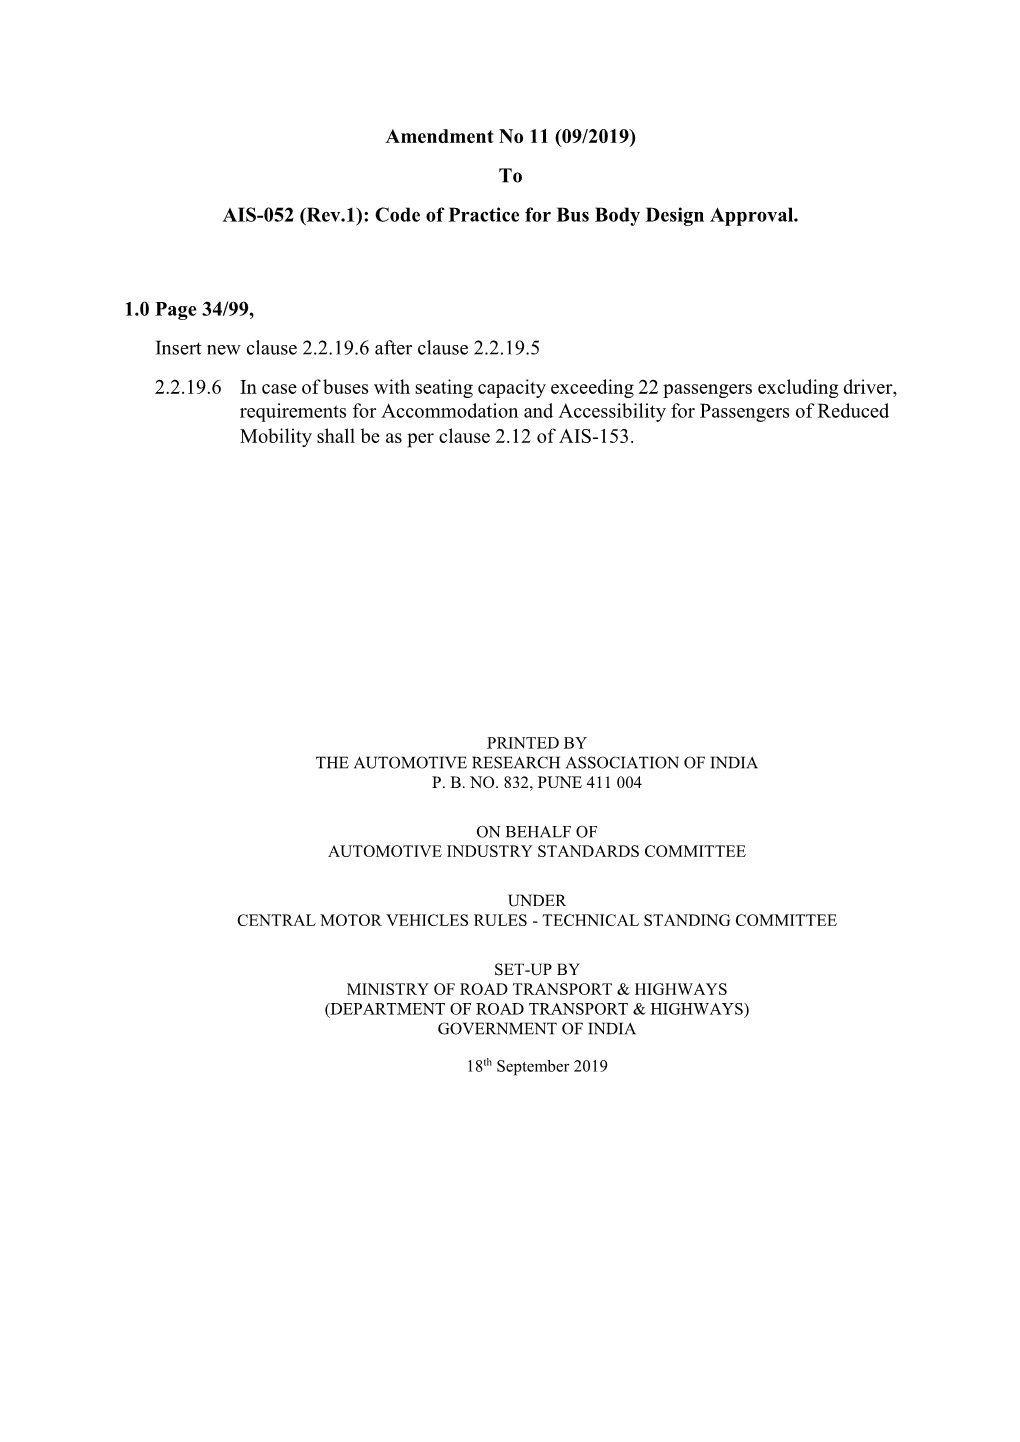 (09/2019) to AIS-052 (Rev.1): Code of Practice for Bus Body Design Approval